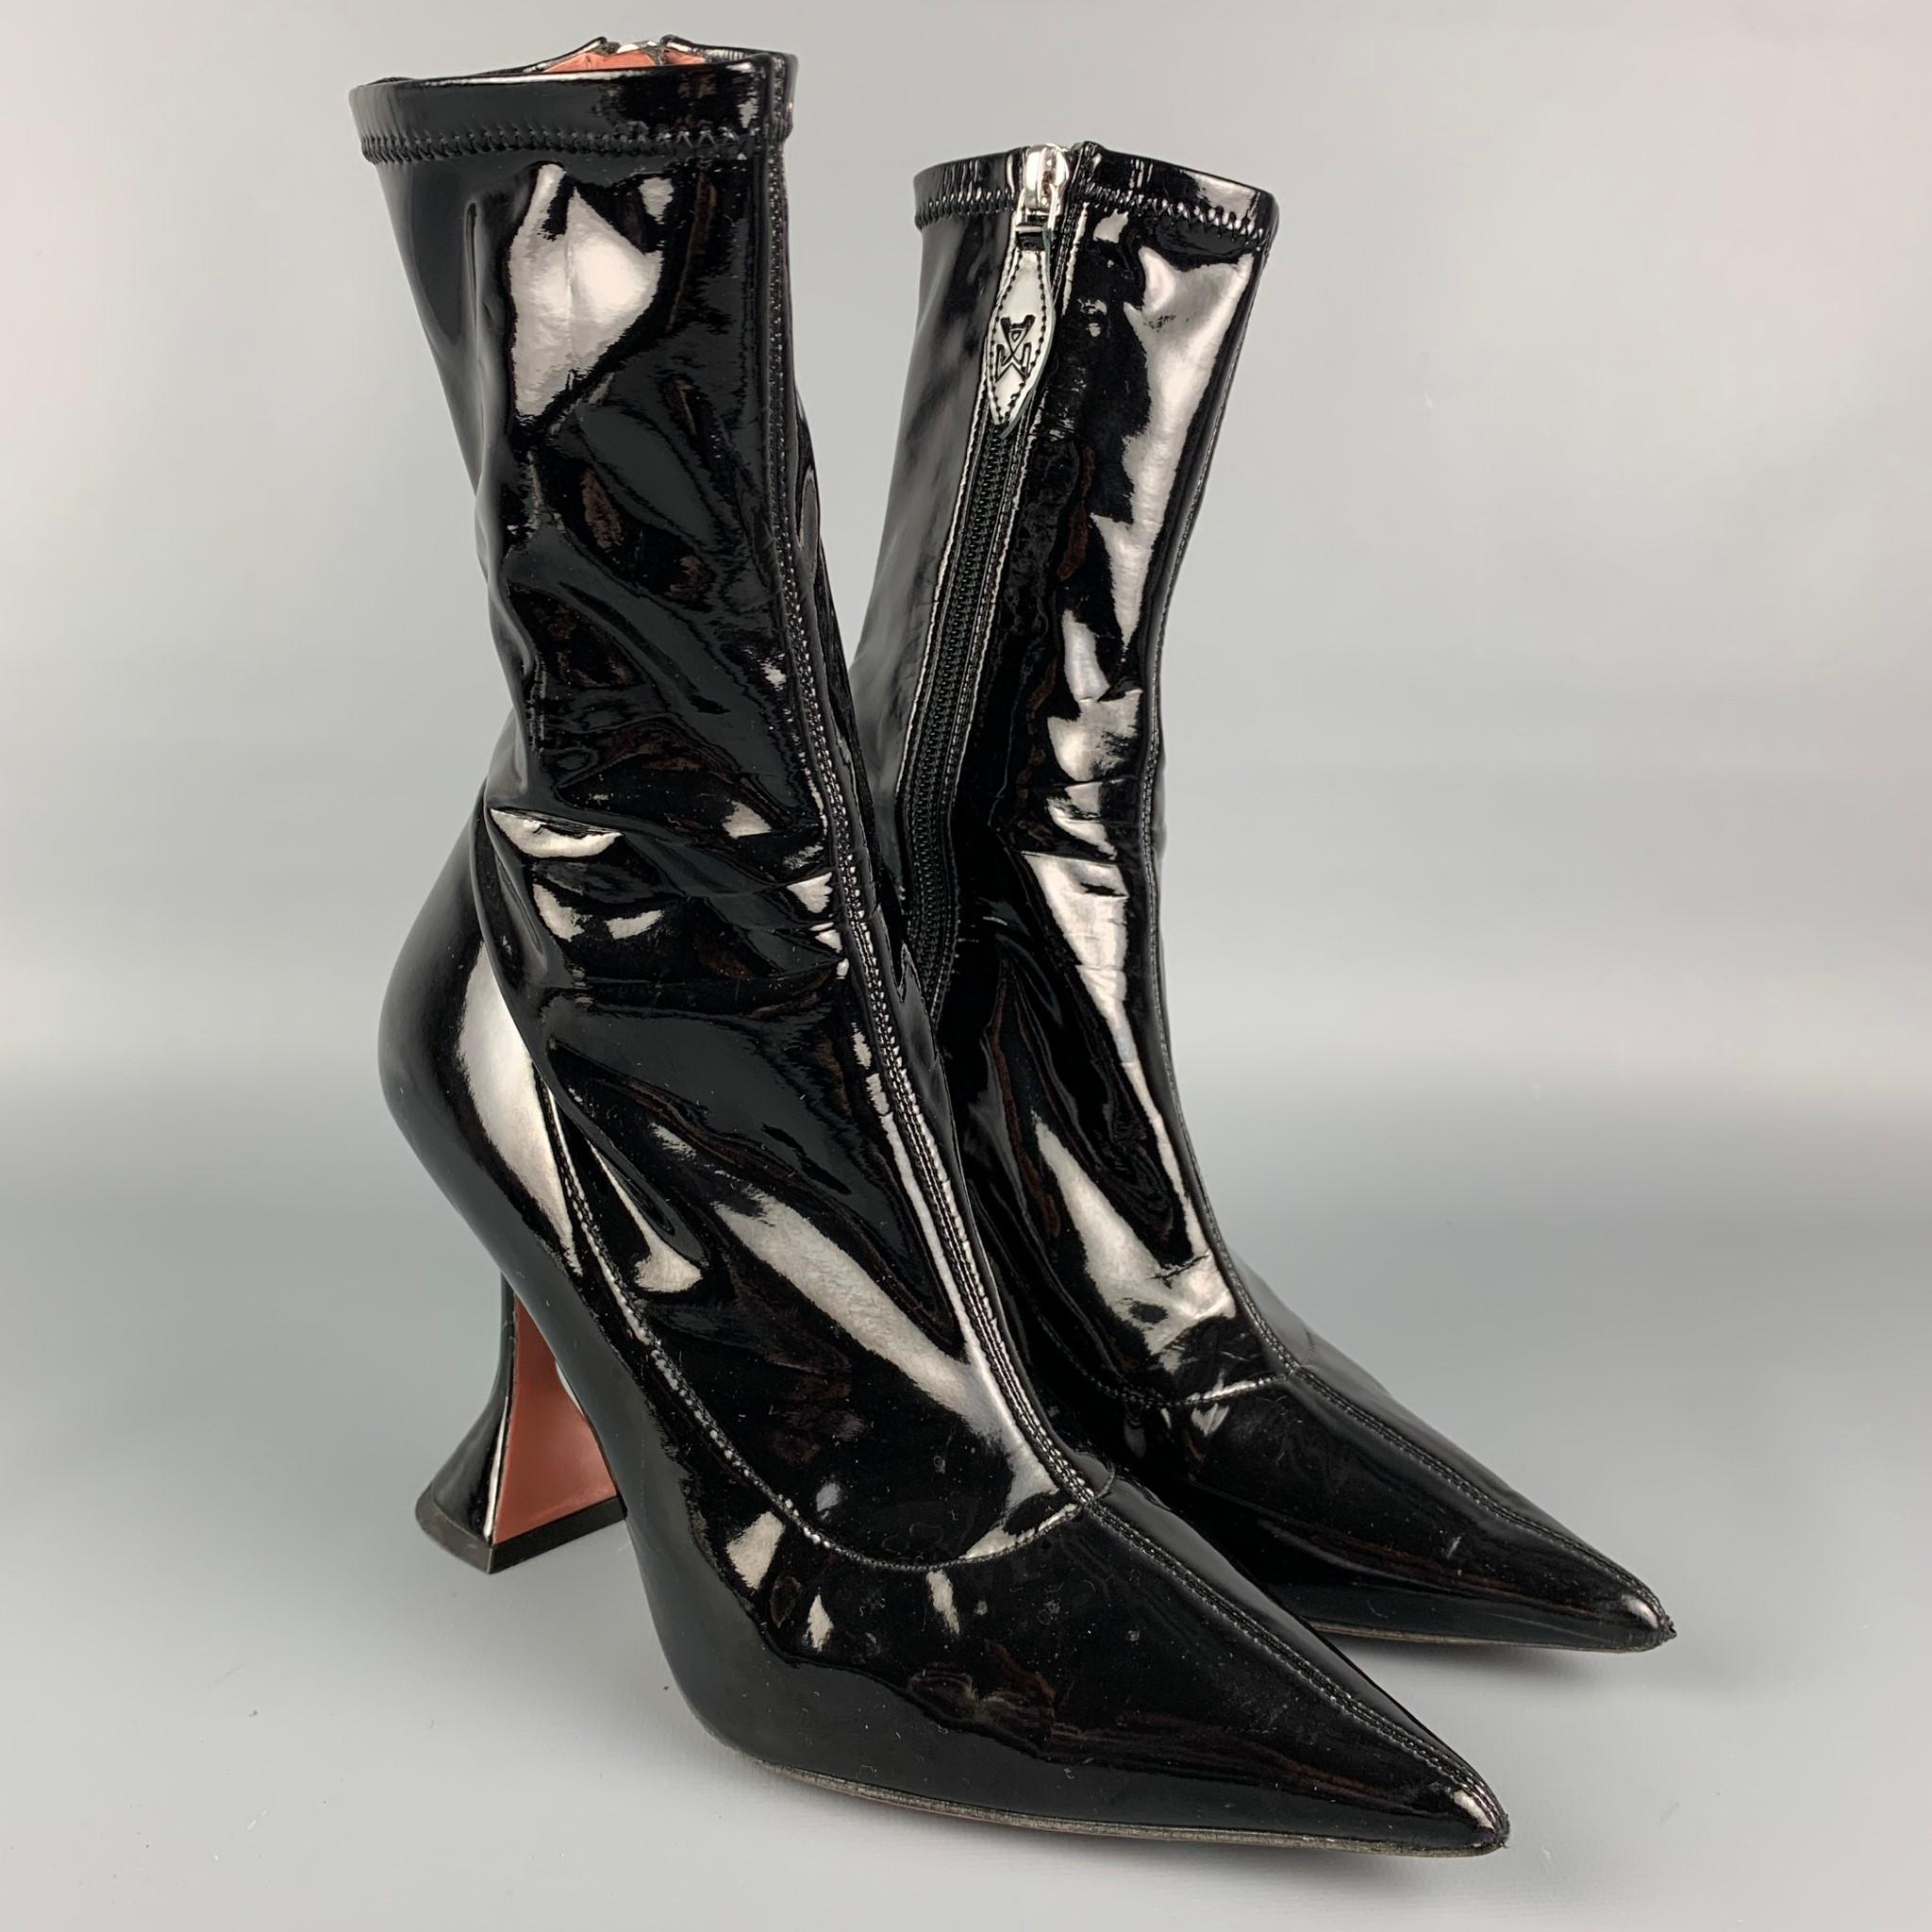 AMINA MUADDI boots comes in a black patent leather featuring a pointed toe, hourglass heel, and a side zipper closure. Made in Italy. 

Very Good Pre-Owned Condition.
Marked: 37
Original Retail Price: $1,130.00

Measurements:

Length: 9.5 in.
Width: